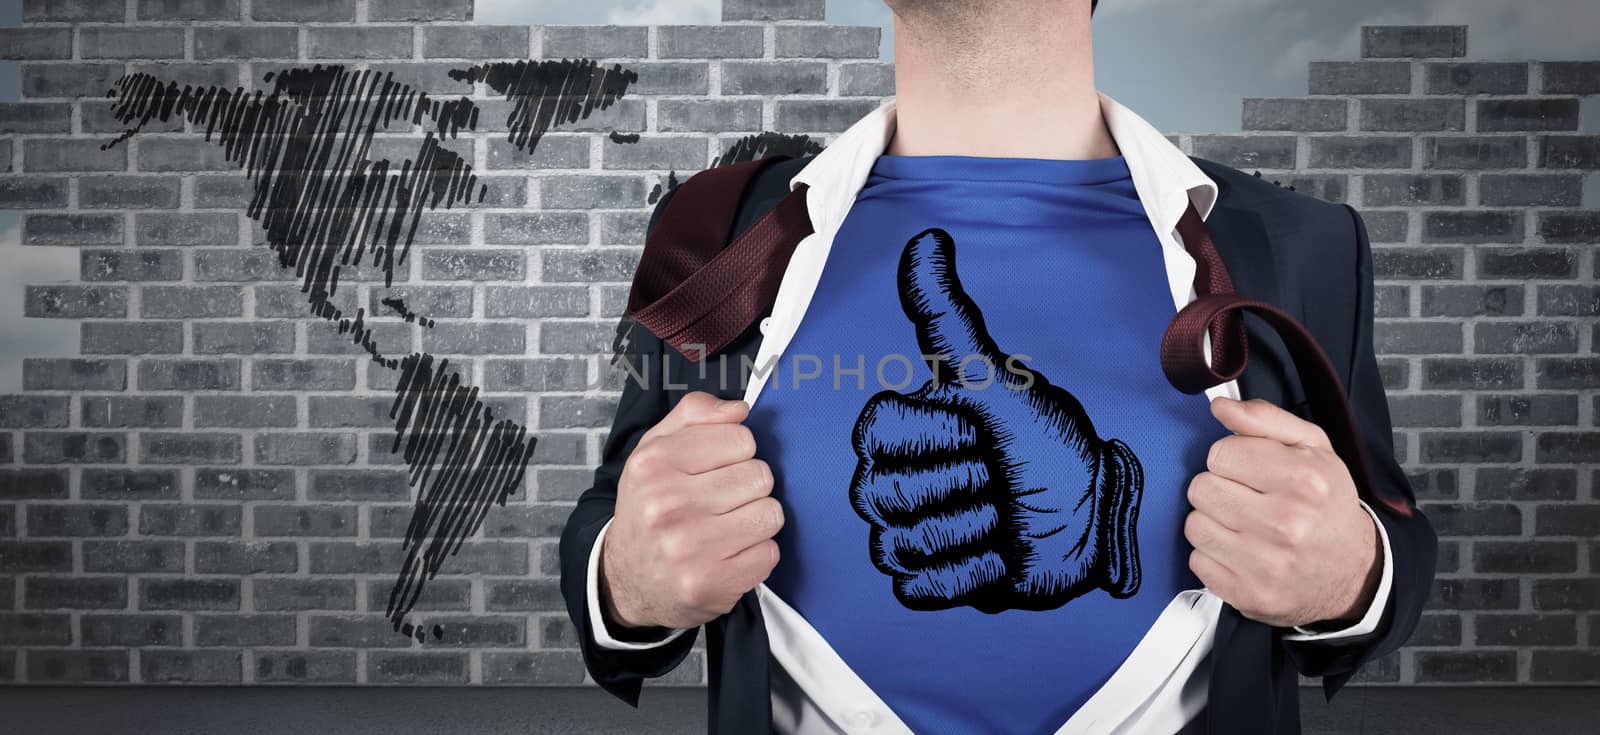 Businessman opening his shirt superhero style against world map doodle against wall